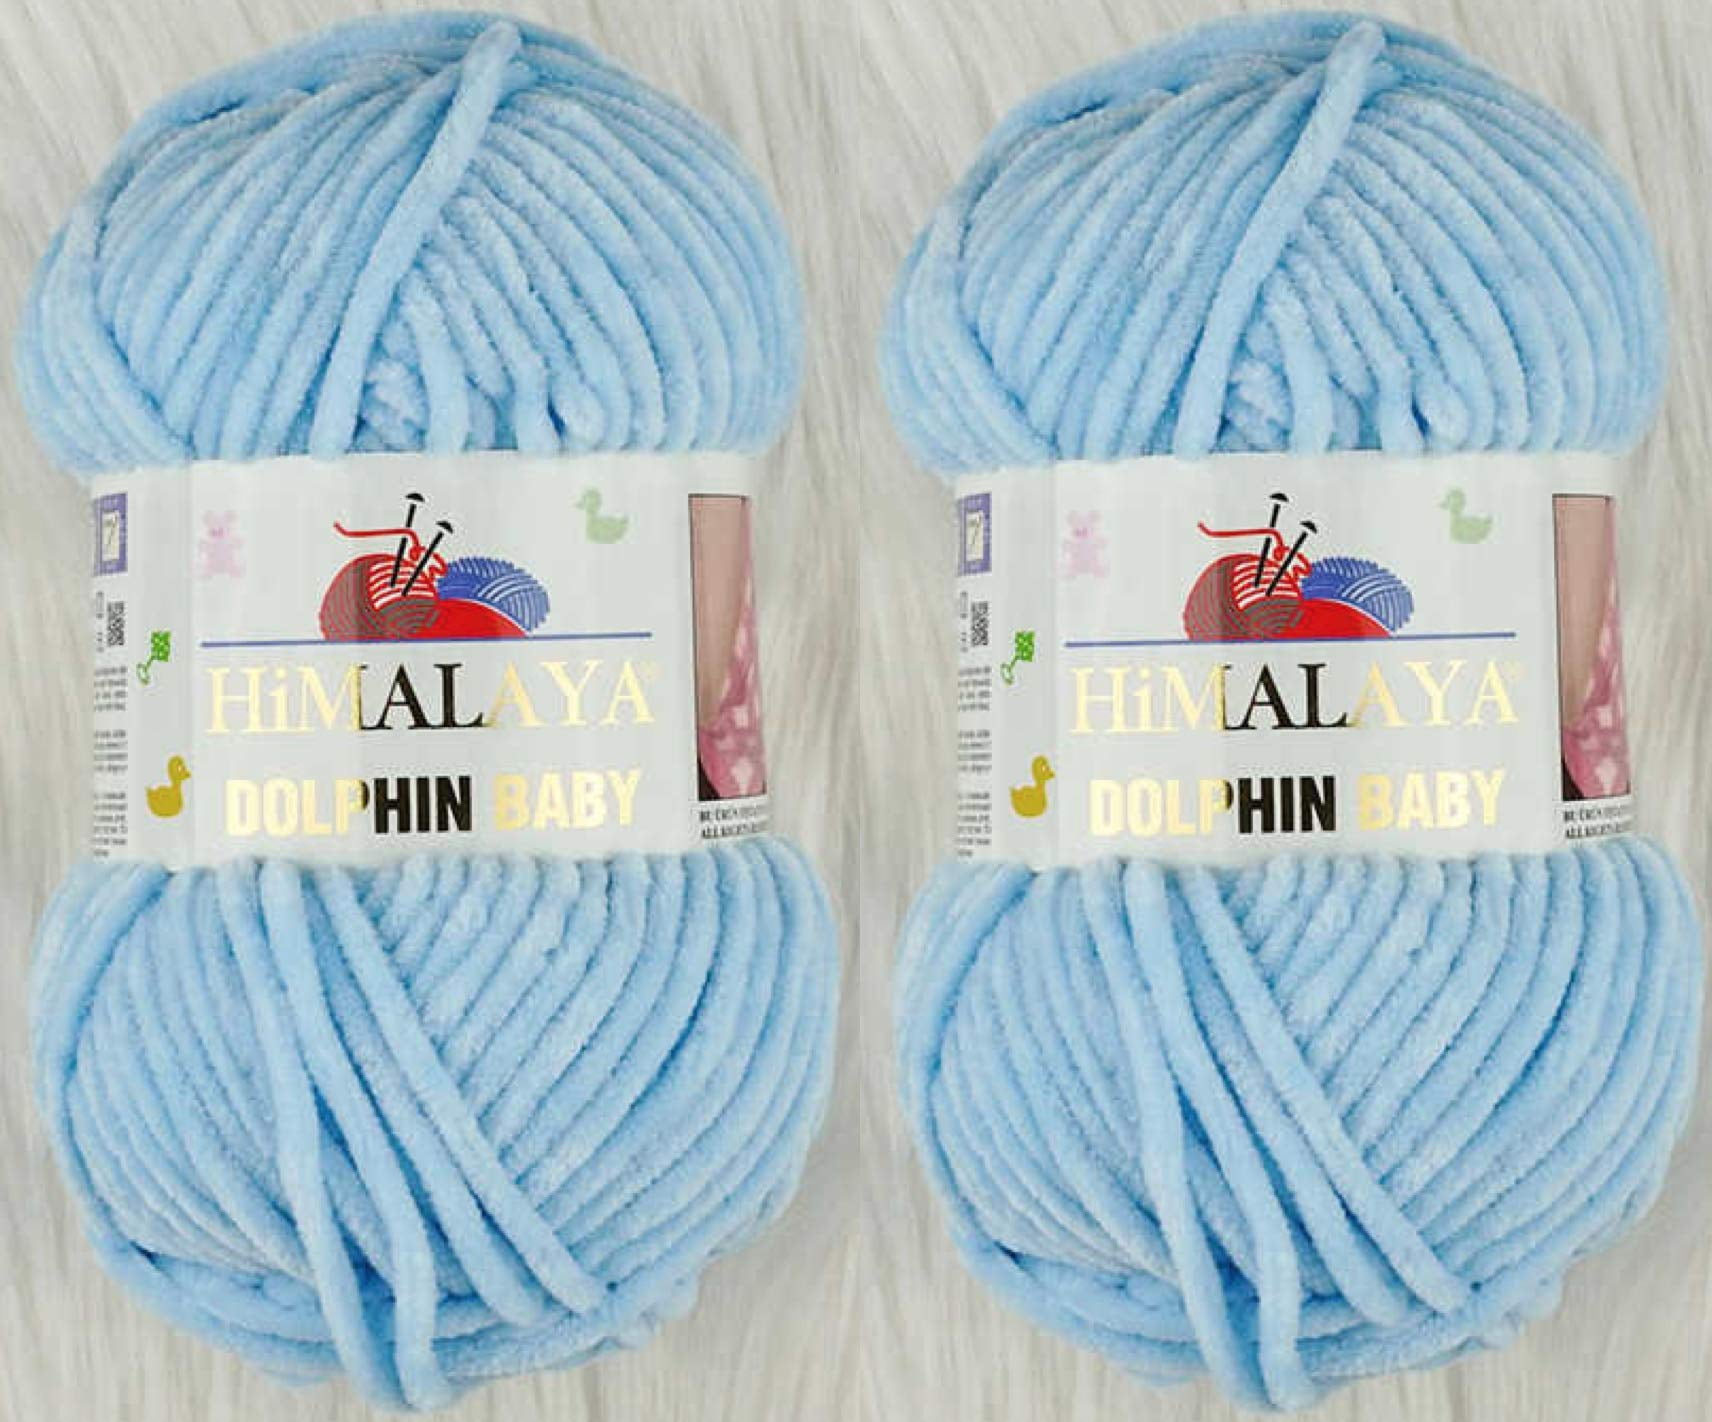  5 Skein (Pack) Himalaya Dolphin Baby Chenille Yarn, 100%  Polyester, Each Skein 100 gr (3.5 oz), 120 m (131 yd), 6 : Super Bulky,  Blue - 80306